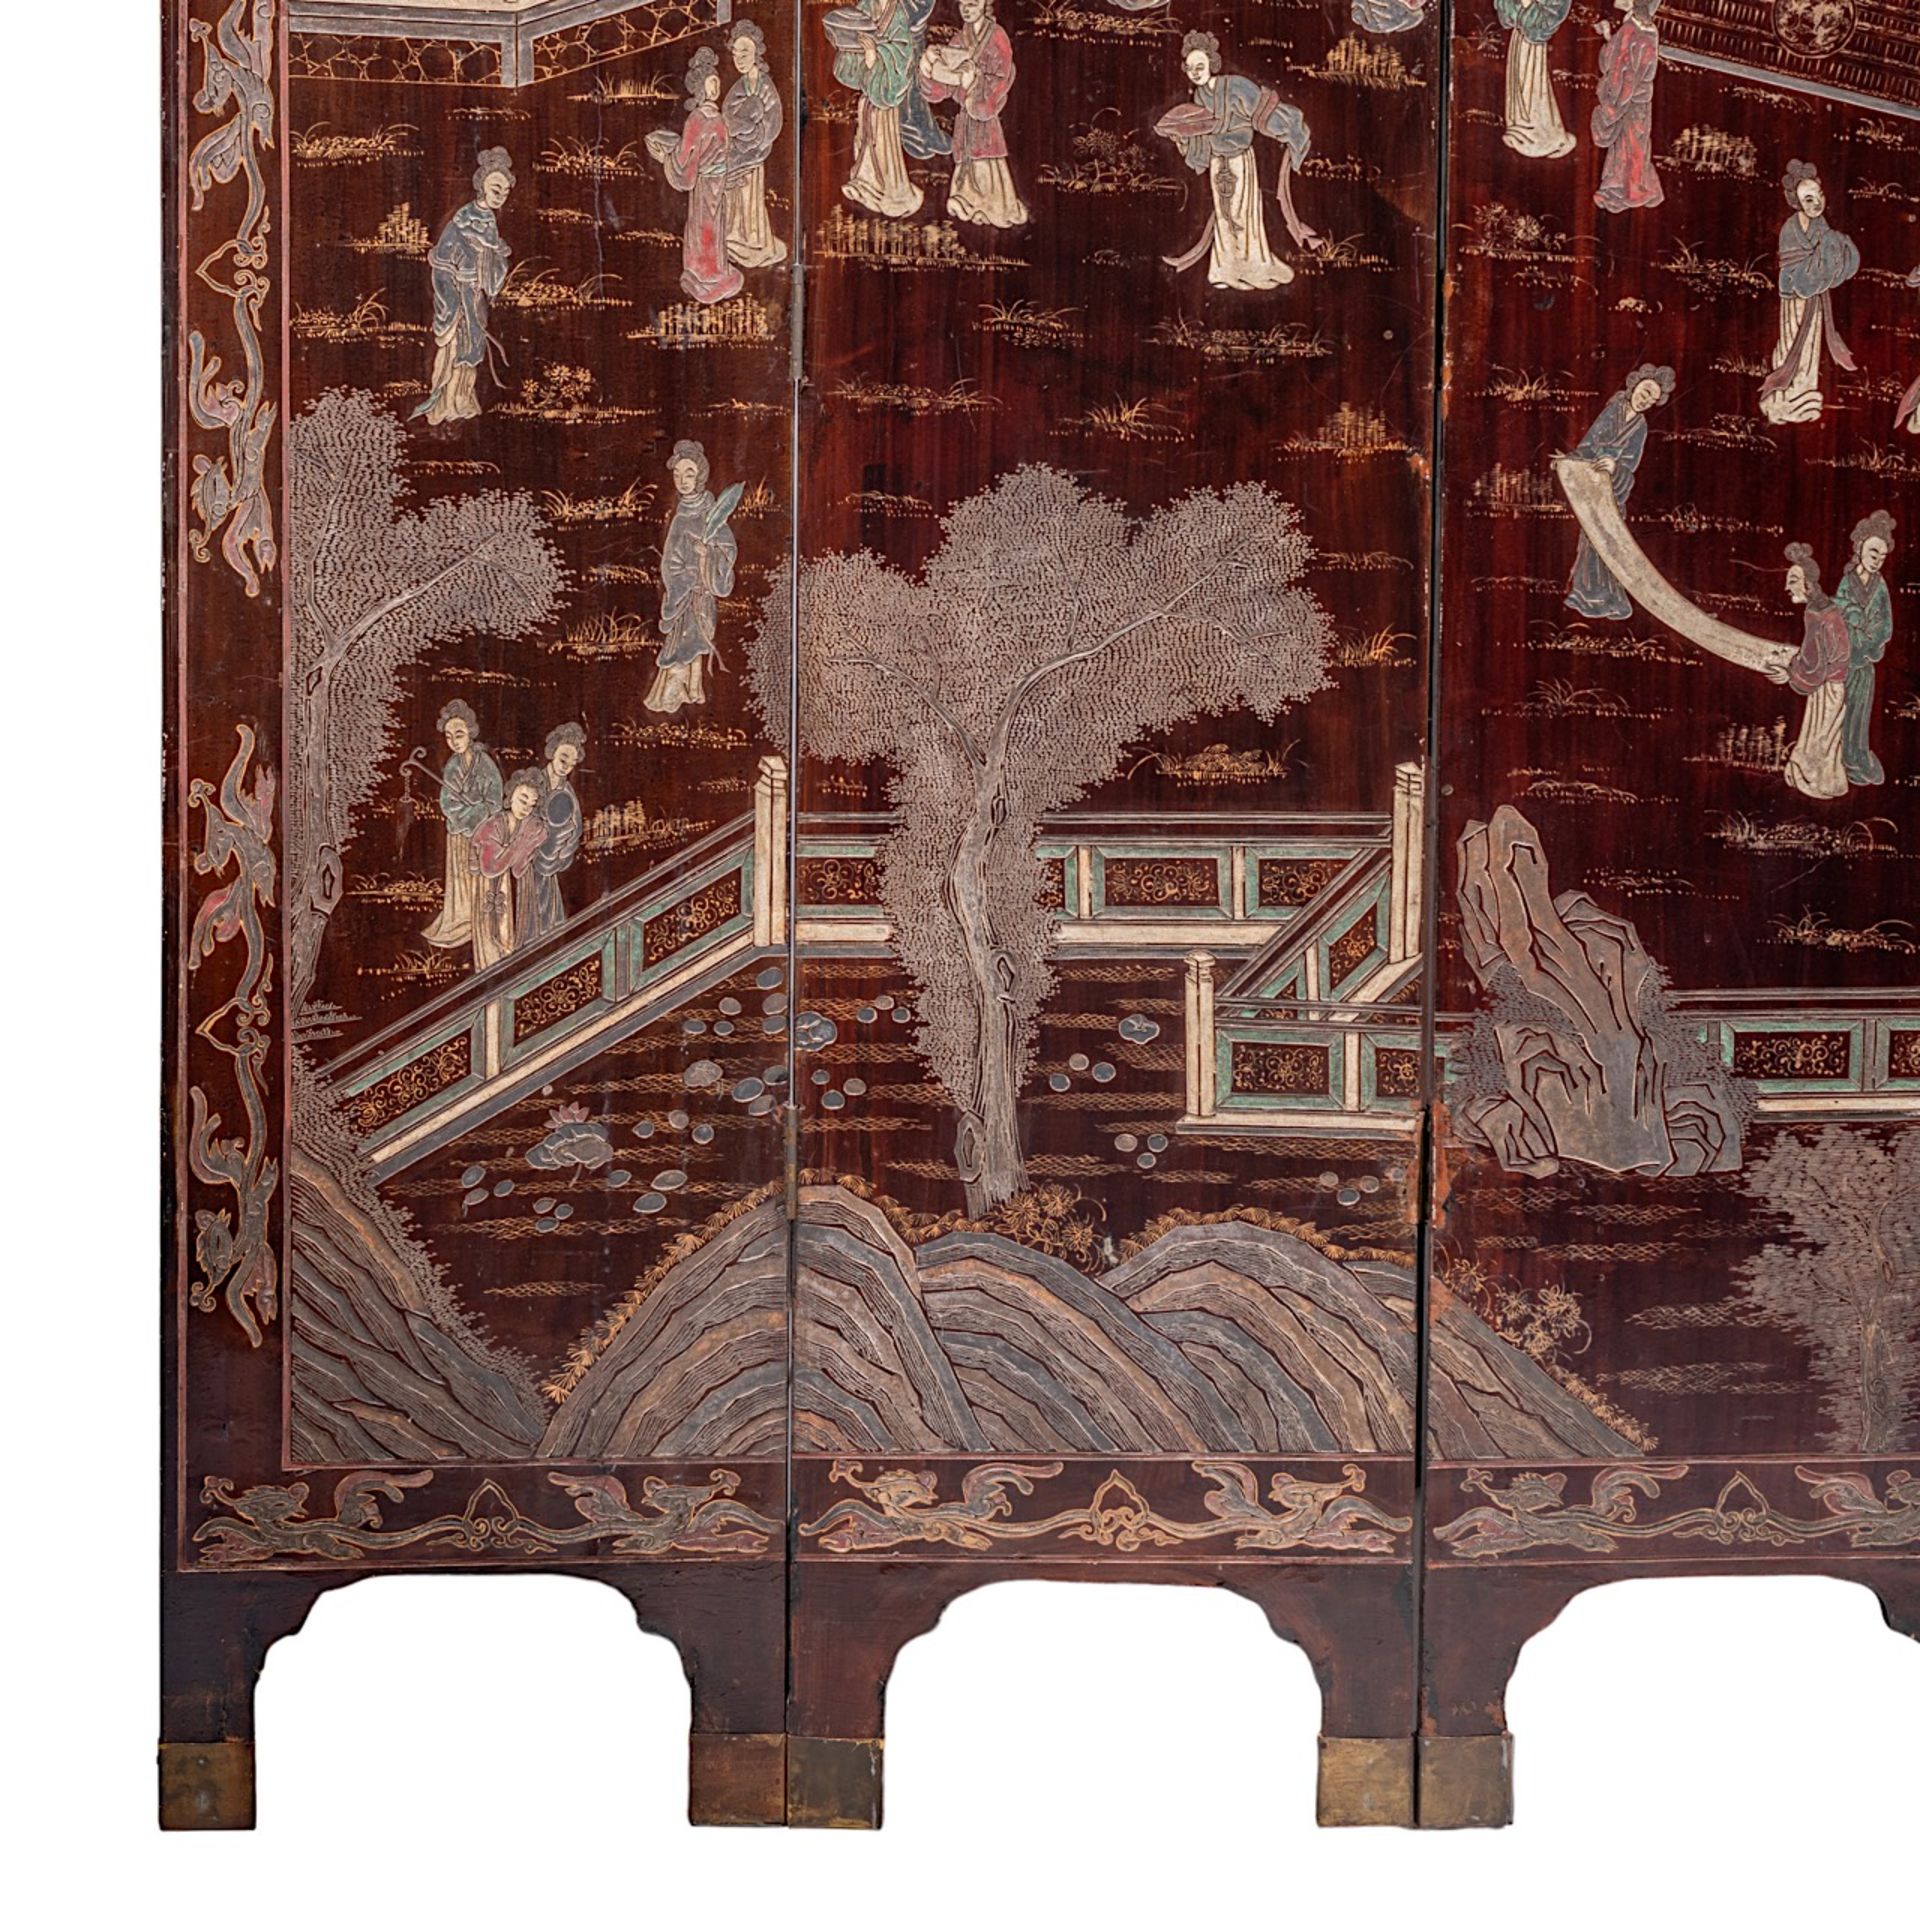 A Chinese coromandel lacquered four-panel chamber screen, late 18thC/19thC, H 162 - W 35,5 (each pan - Image 6 of 10